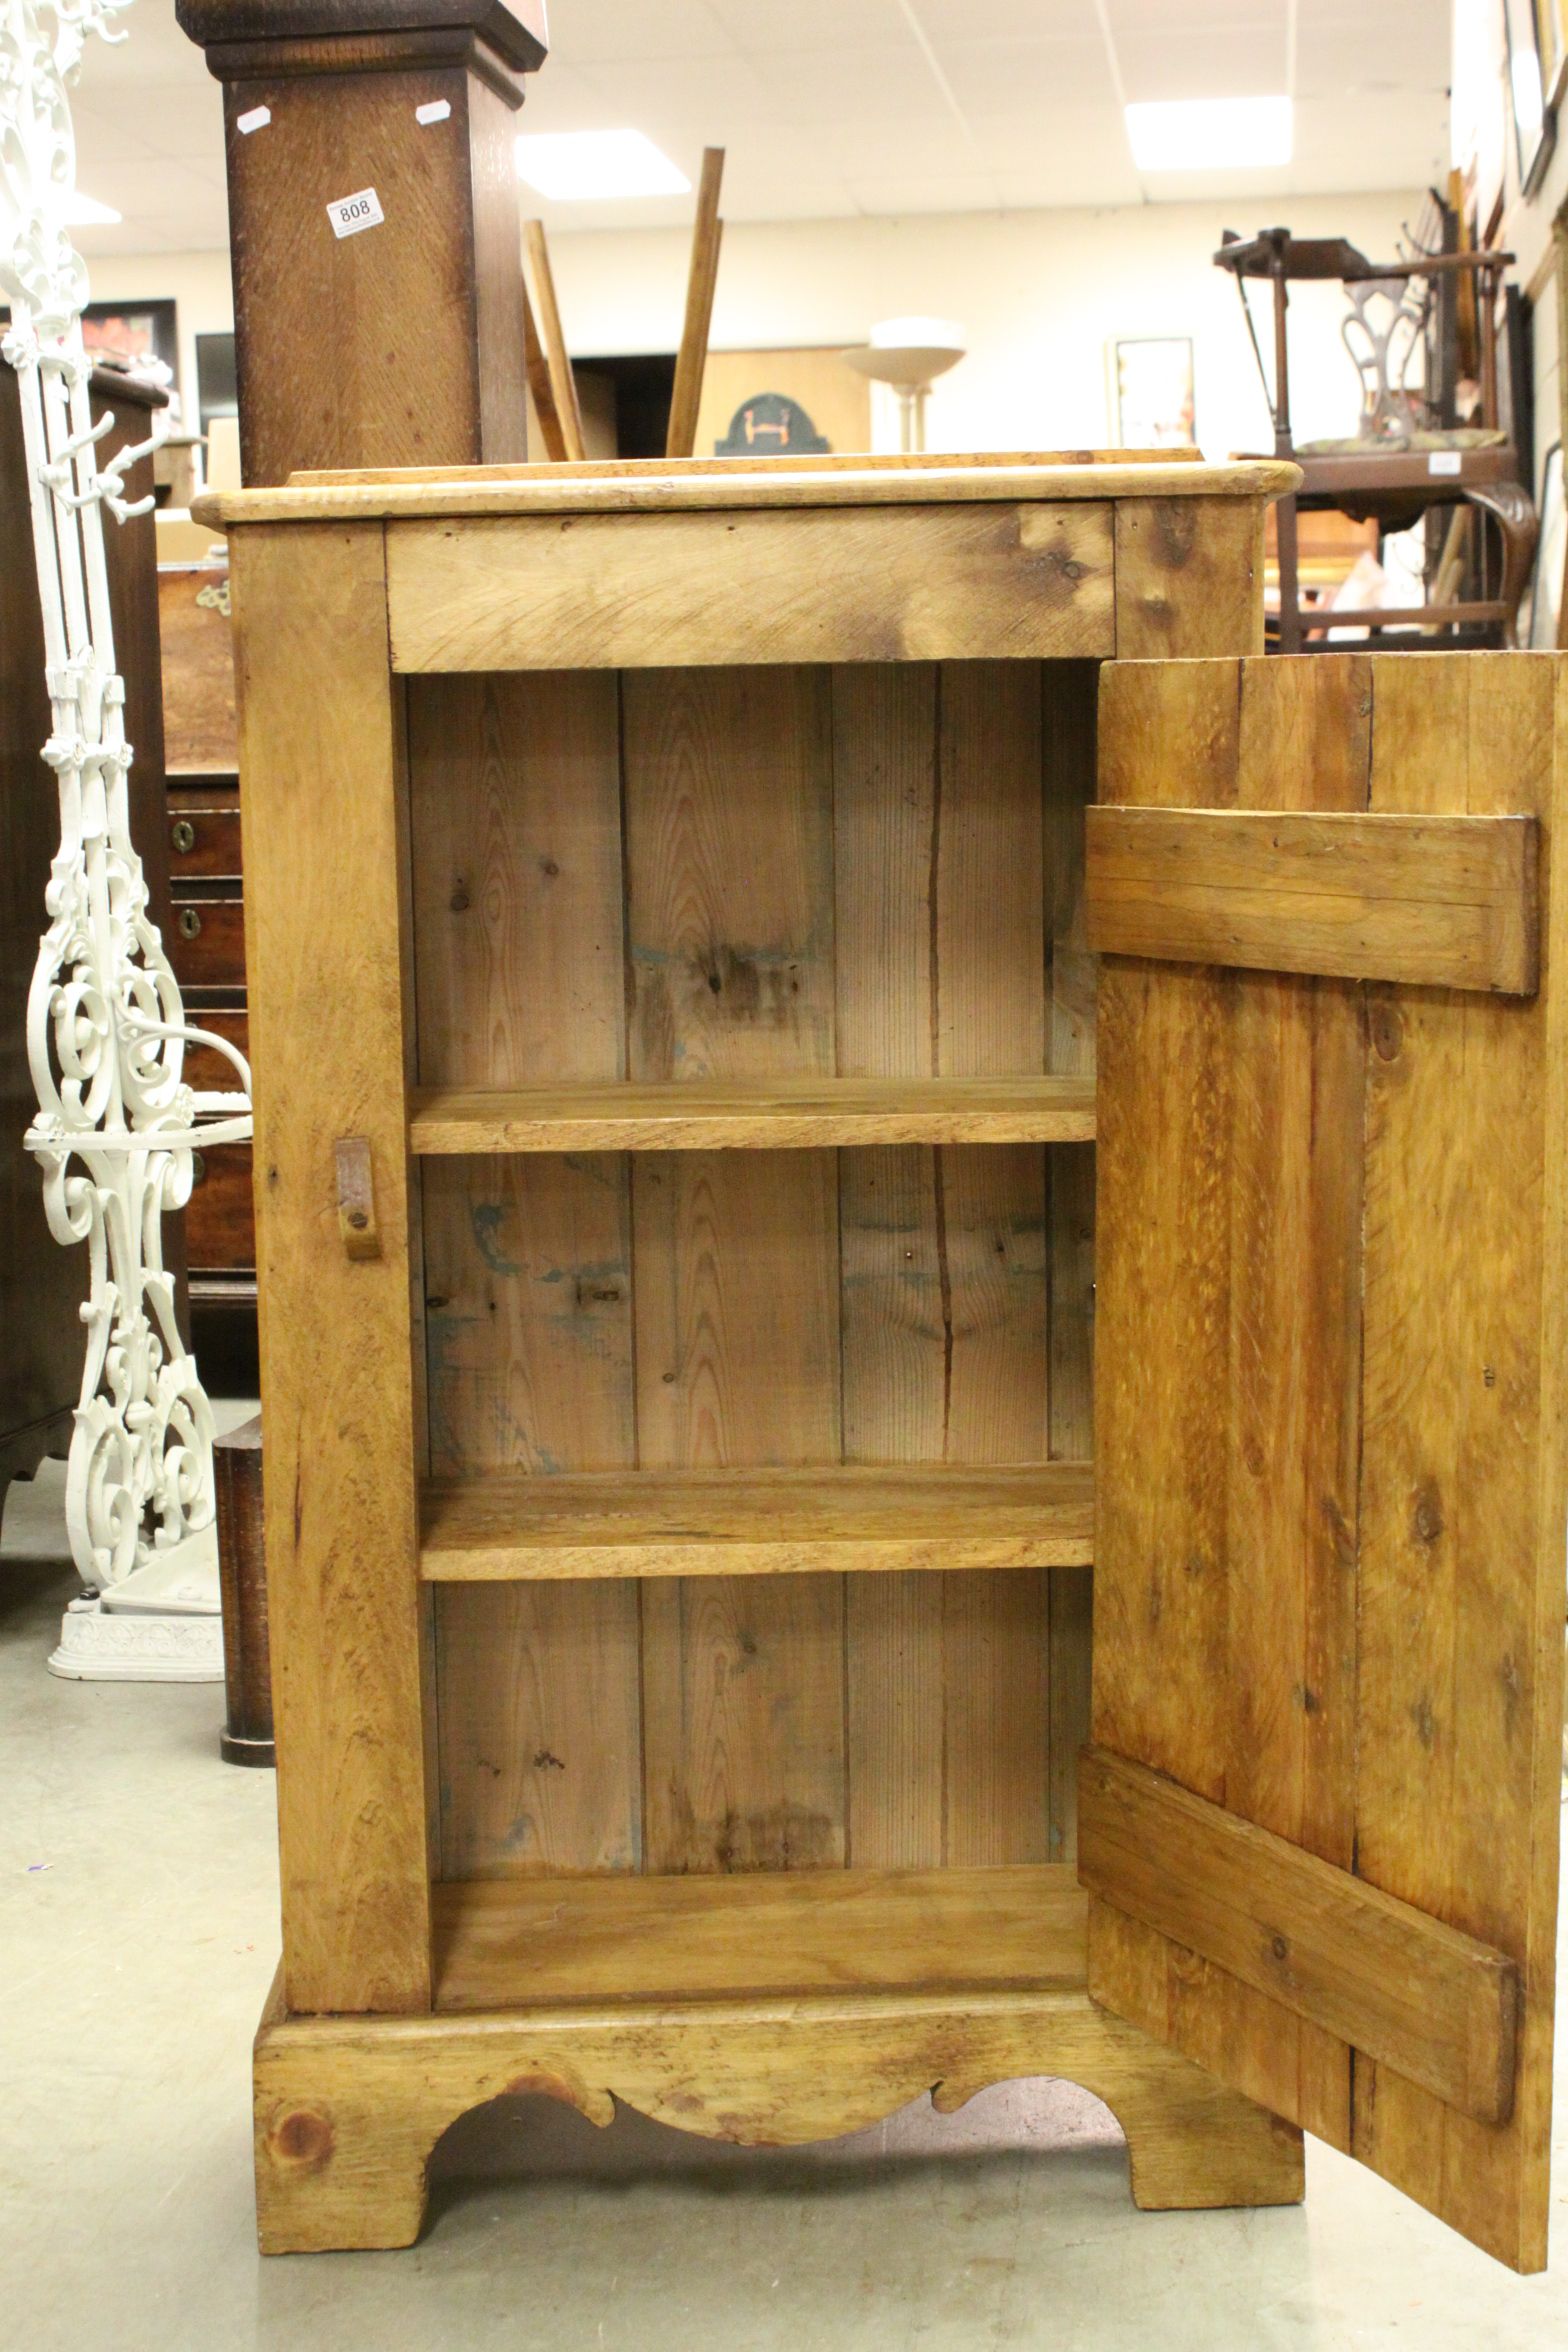 Pine kitchen storage cupboard, with shelves on shaped base - Image 2 of 2